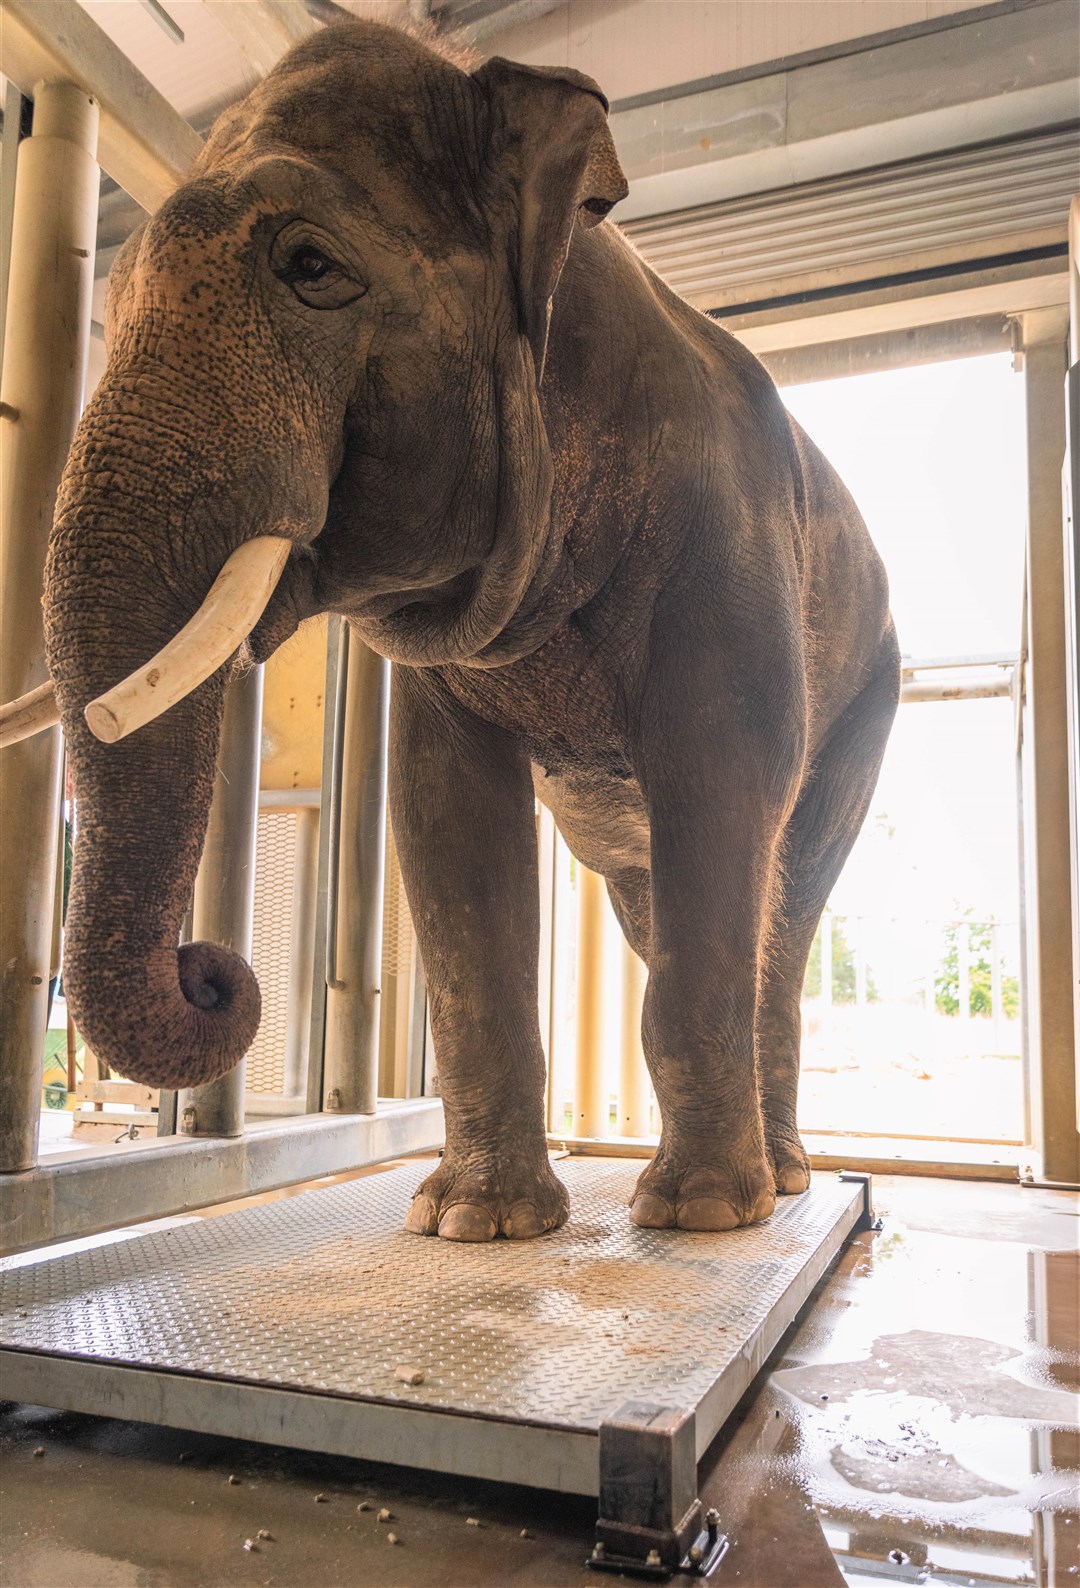 The zoo’s endangered Asian elephant called Ming Jung had to be coaxed onto scales with some snacks (ZSL/PA)